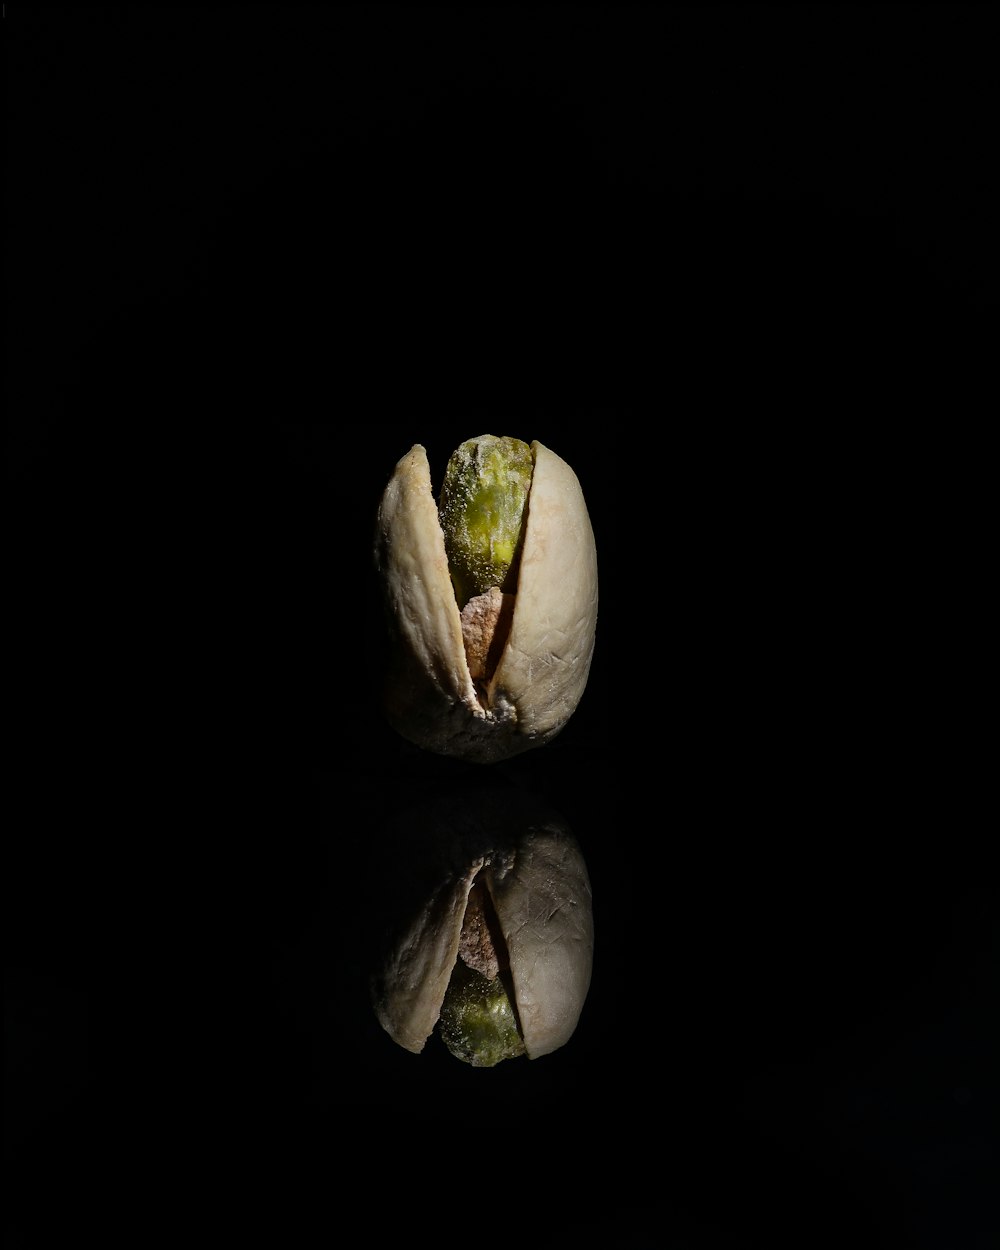 a pistachio on a black background with a reflection